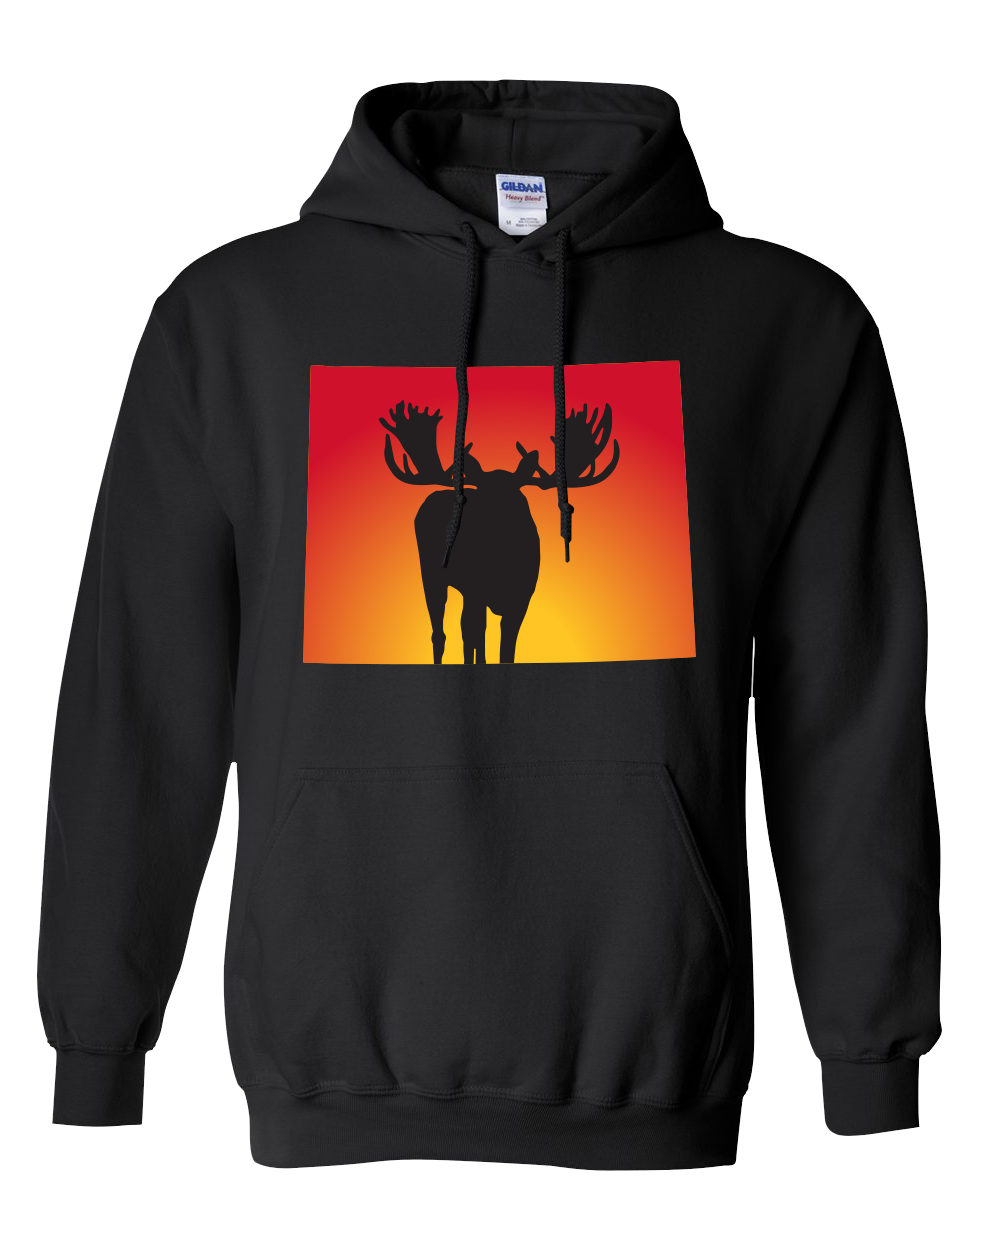 Pullover Hooded Sweatshirt Wyoming Black Moose Vibrant Design High Quality Tight Knit Ring Spun Low Maintenance Cotton Printed With The Newest Available Color Transfer Technology